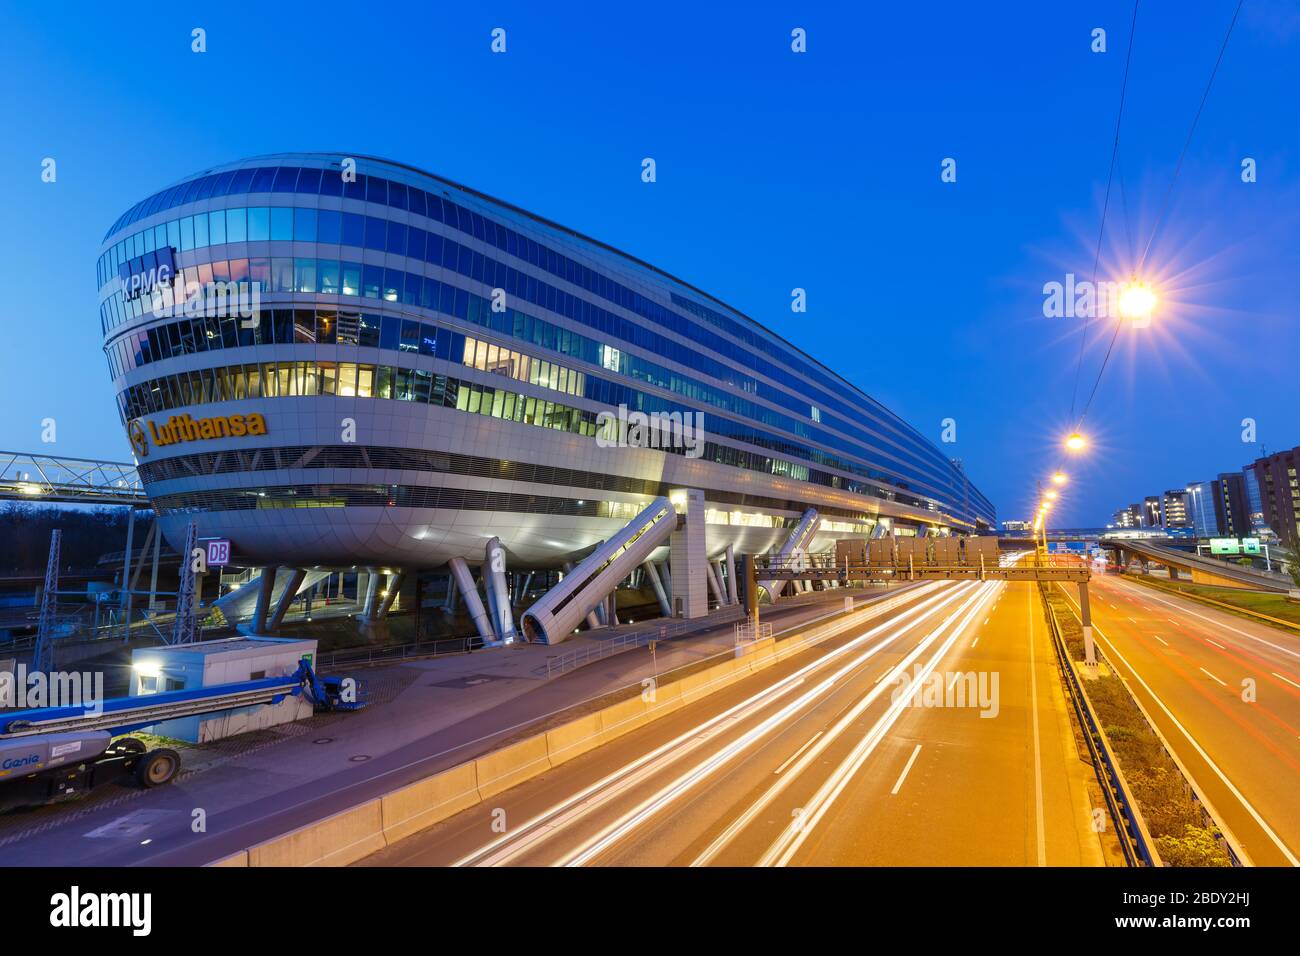 Frankfurt, Germany – April 7, 2020: The Squaire building at Frankfurt airport (FRA) in Germany. Stock Photo